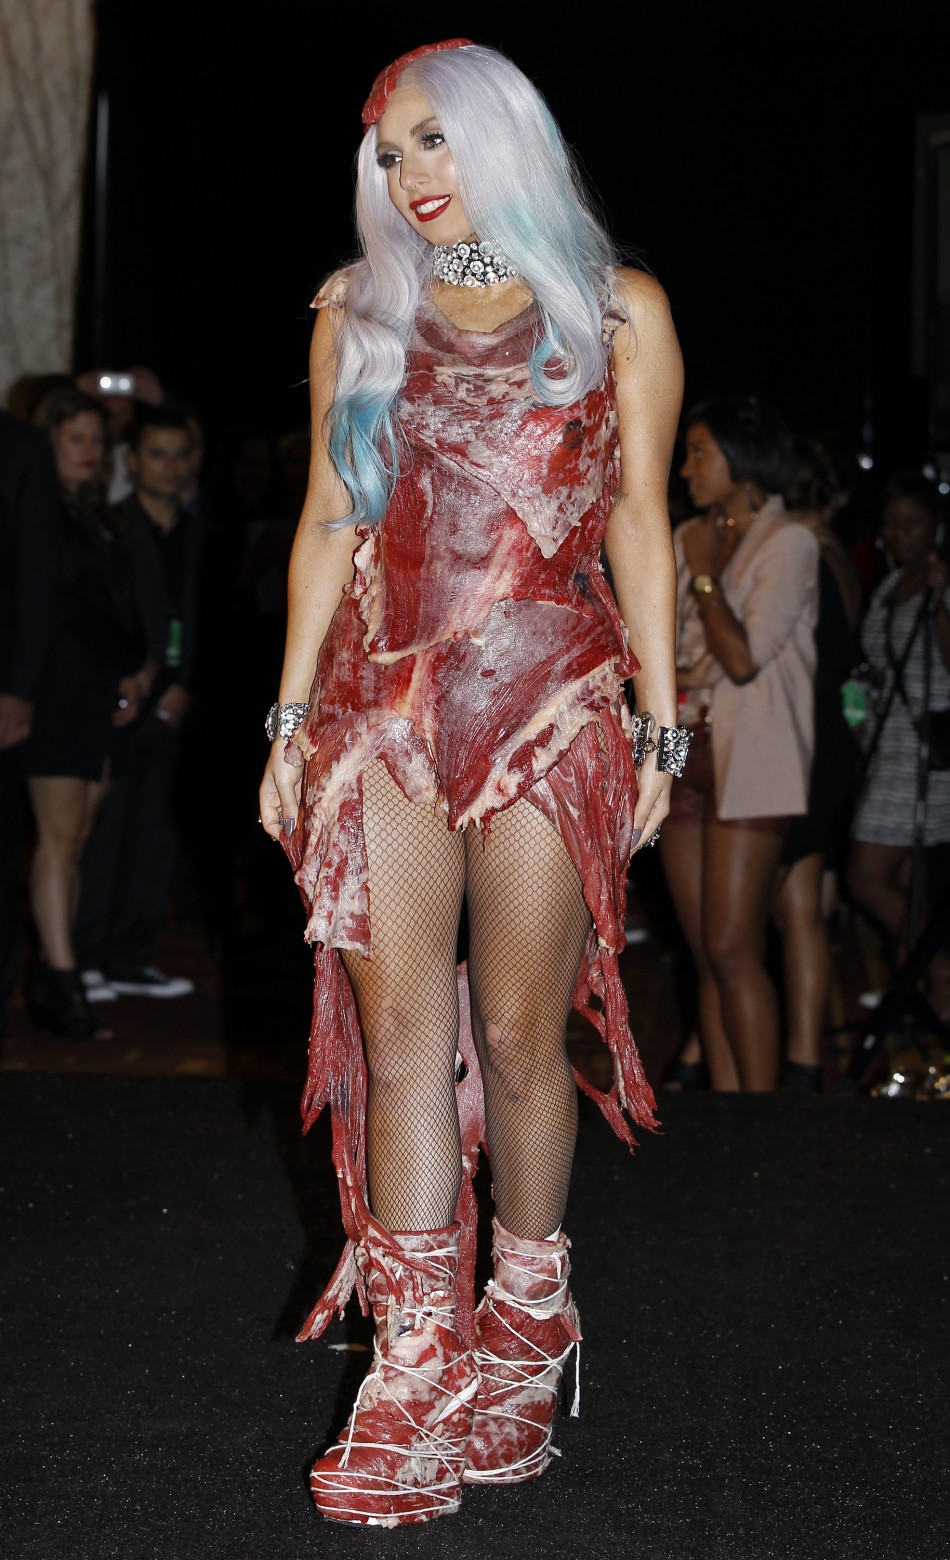 Lady Gaga wearing an outfit made of meat poses in the photo room at the 2010 MTV Video Music Awards in Los Angeles